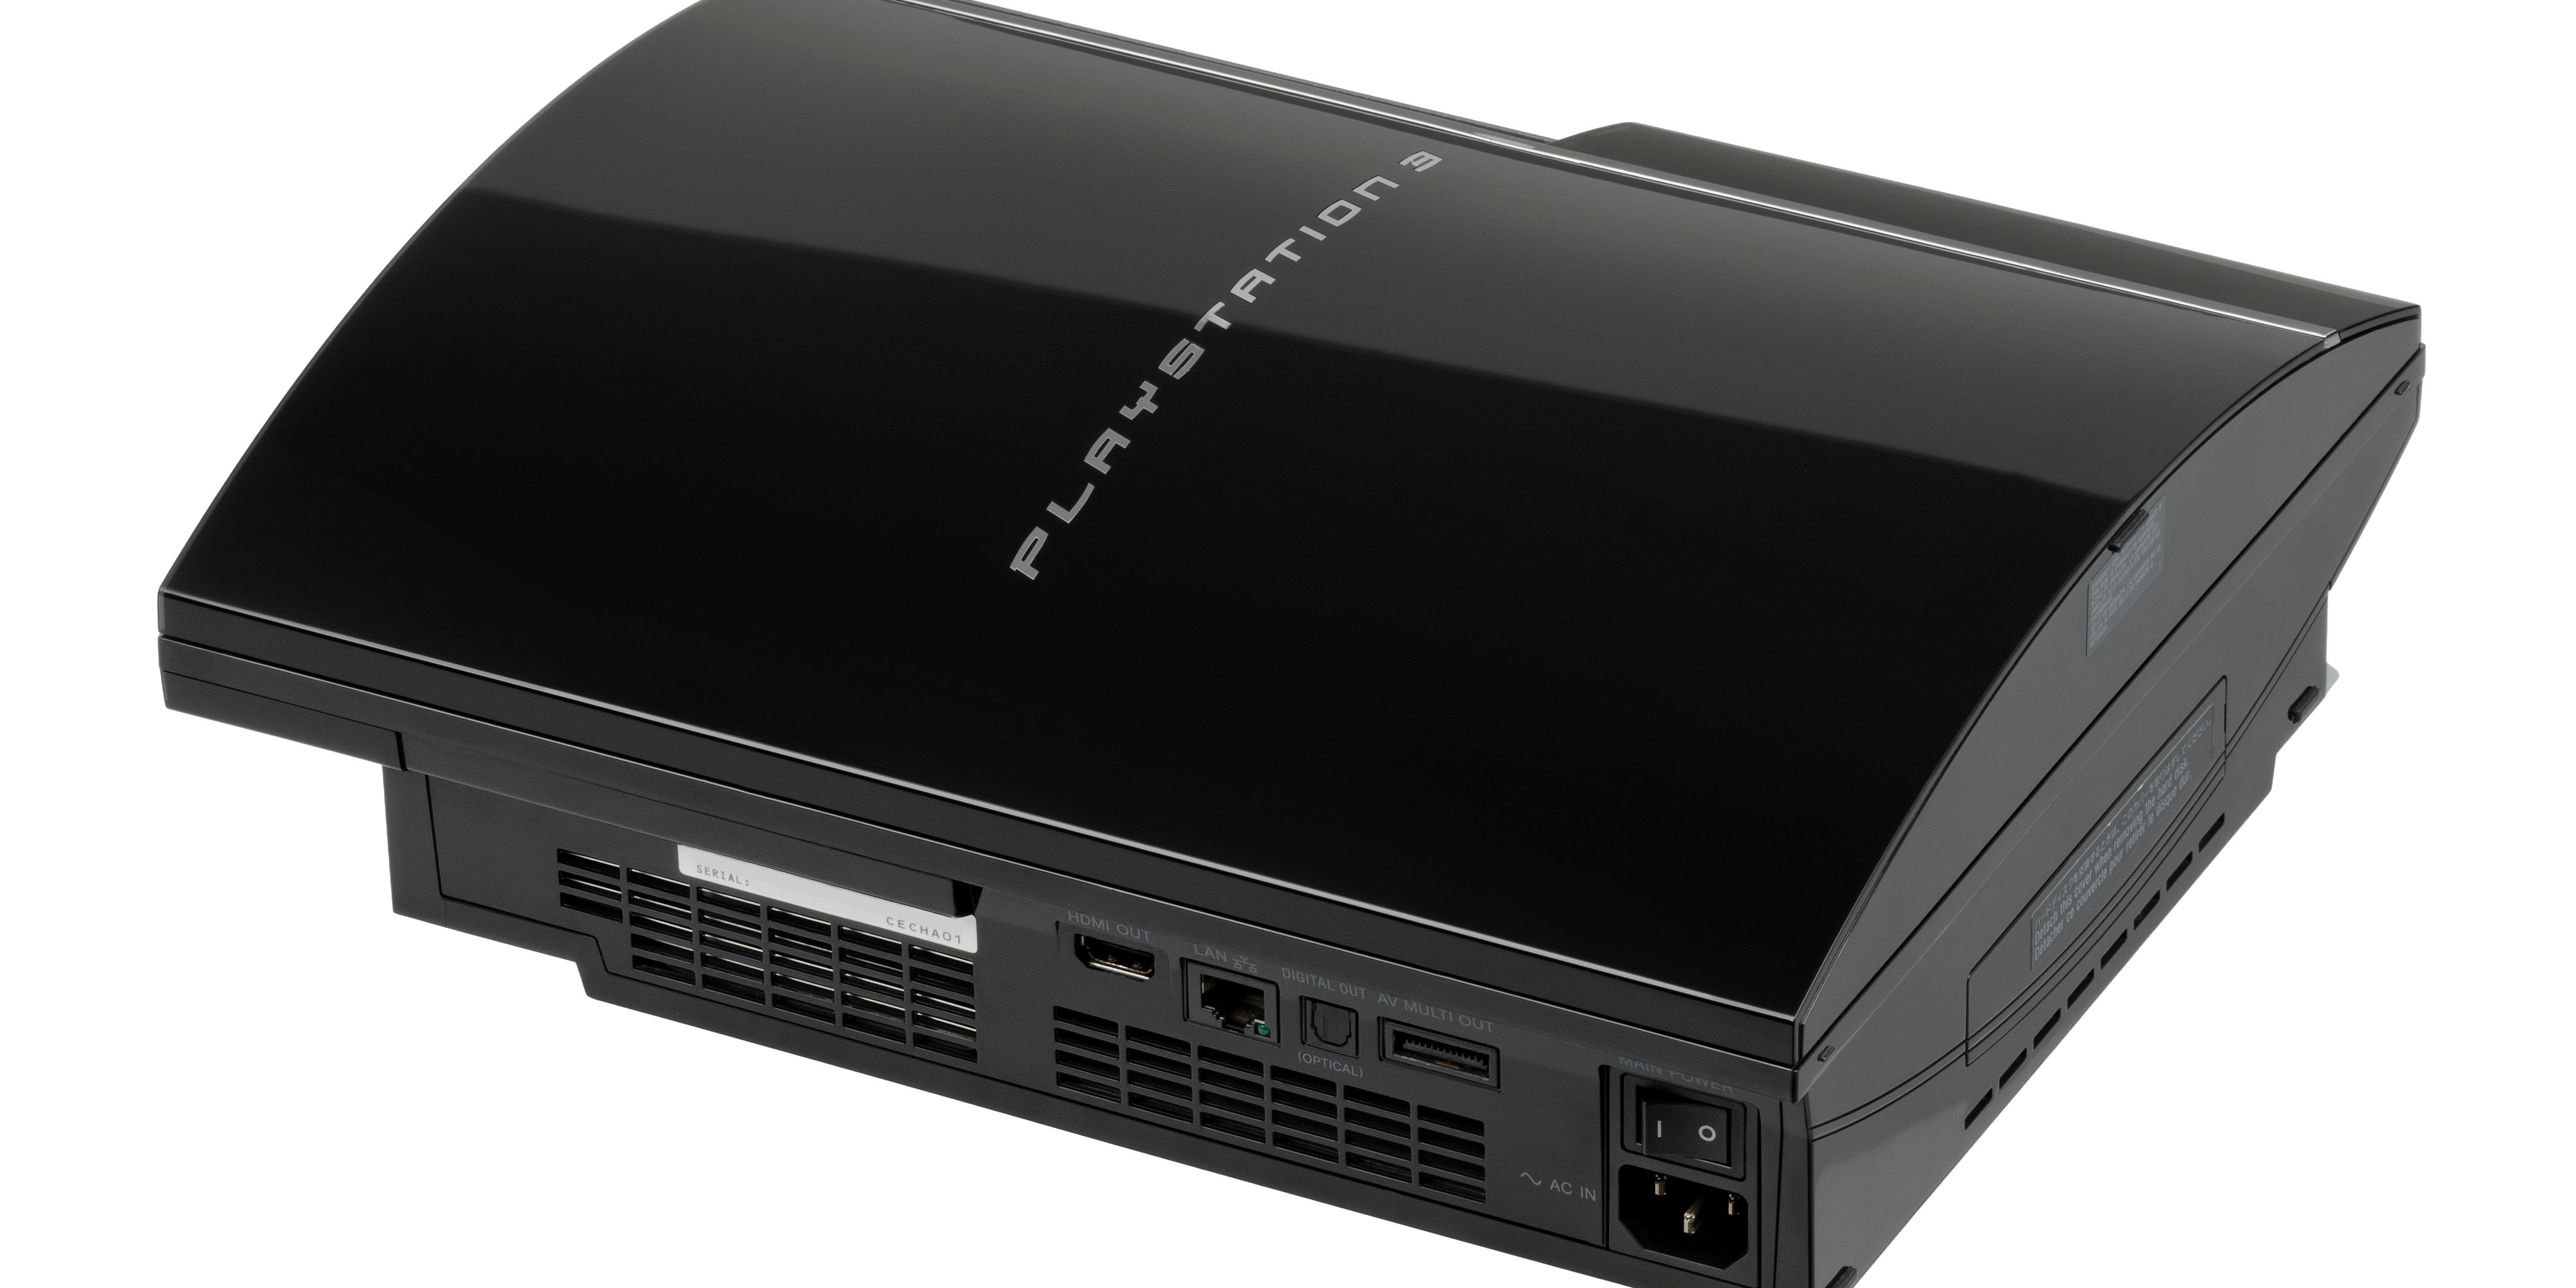 Owners Of Phat PlayStation 3 Have A Month Left To Claim OtherOS Settlement